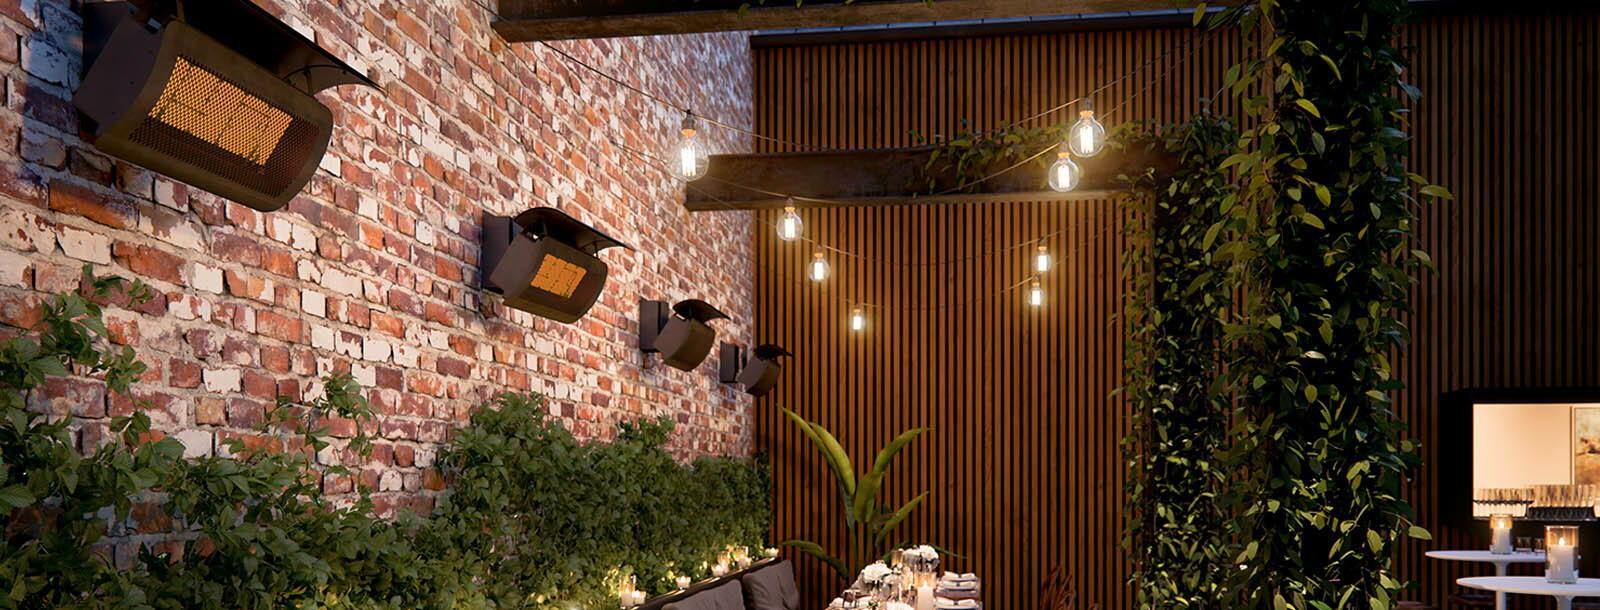 Infrared Patio Heater Buying Guide: Tips to Warm Your Space